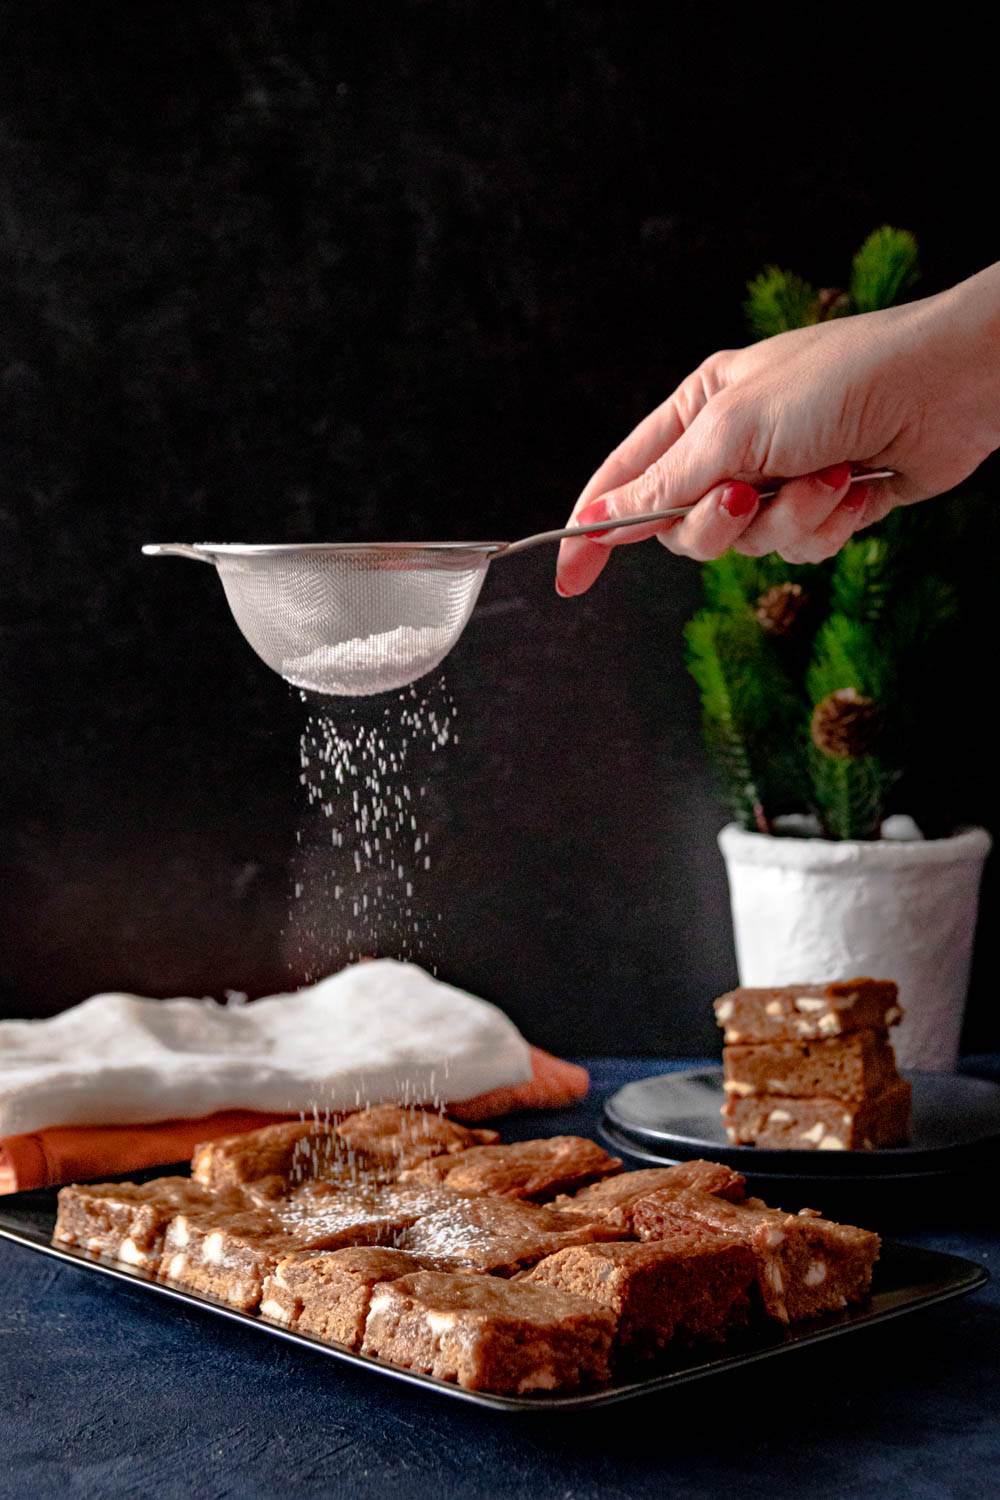 A hand using a small sieve to dust the brownies with powdered sugar.